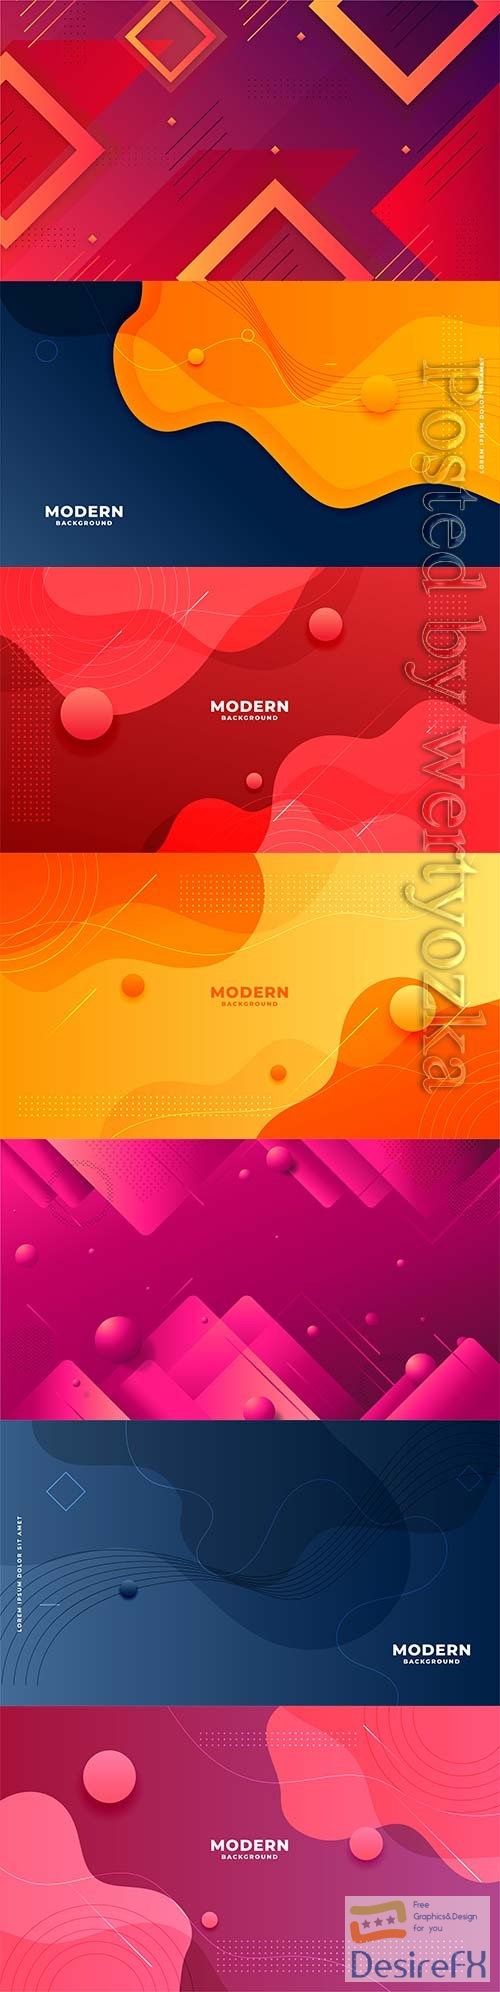 Stylish abstra gradient vector background